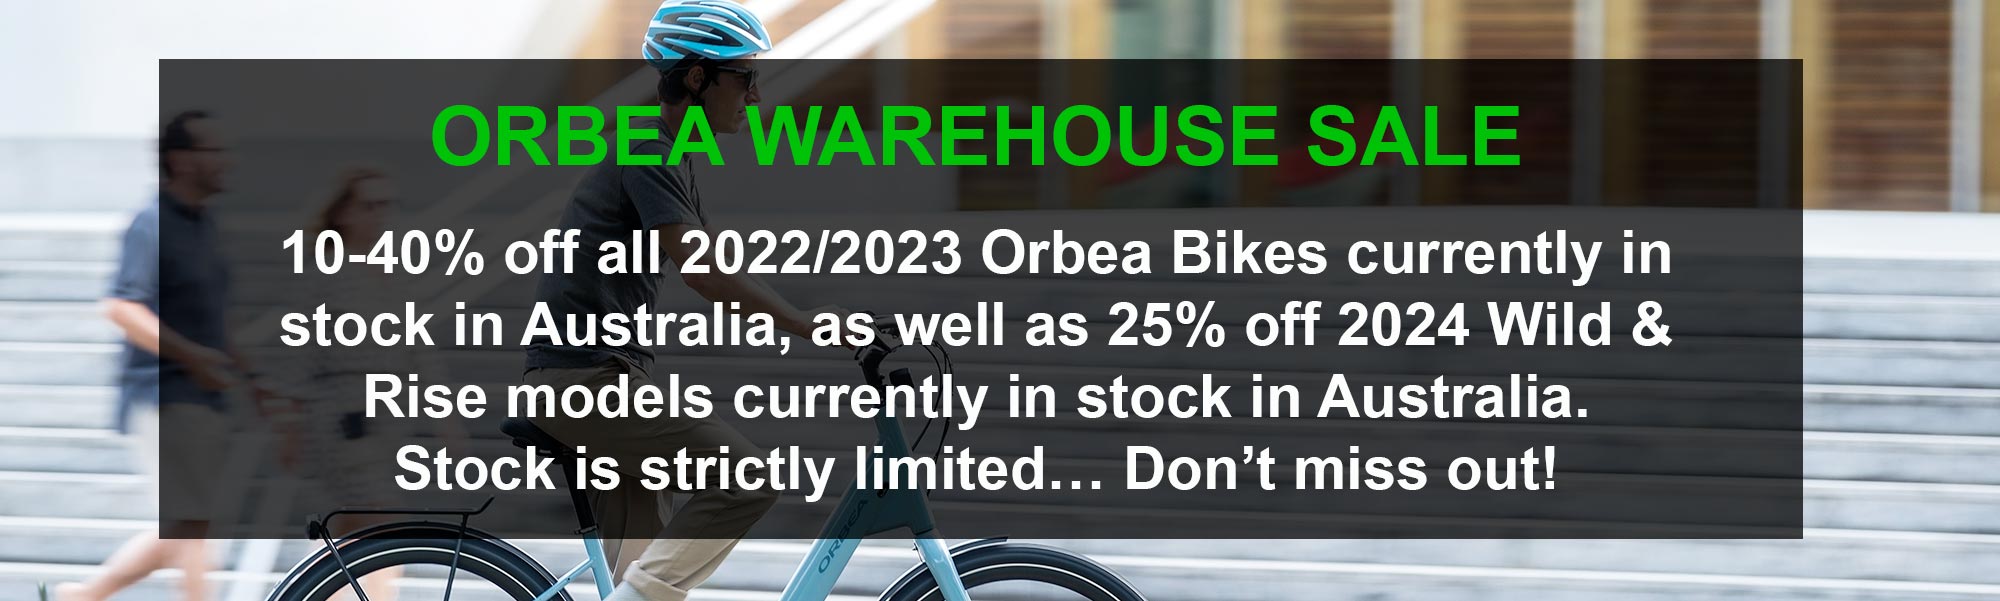 ORBEA WAREHOUSE SALE 10-40% off all 2022/2023 Orbea Bikes currently in stock in Australia. Stock is strictly limited… Don’t miss out!